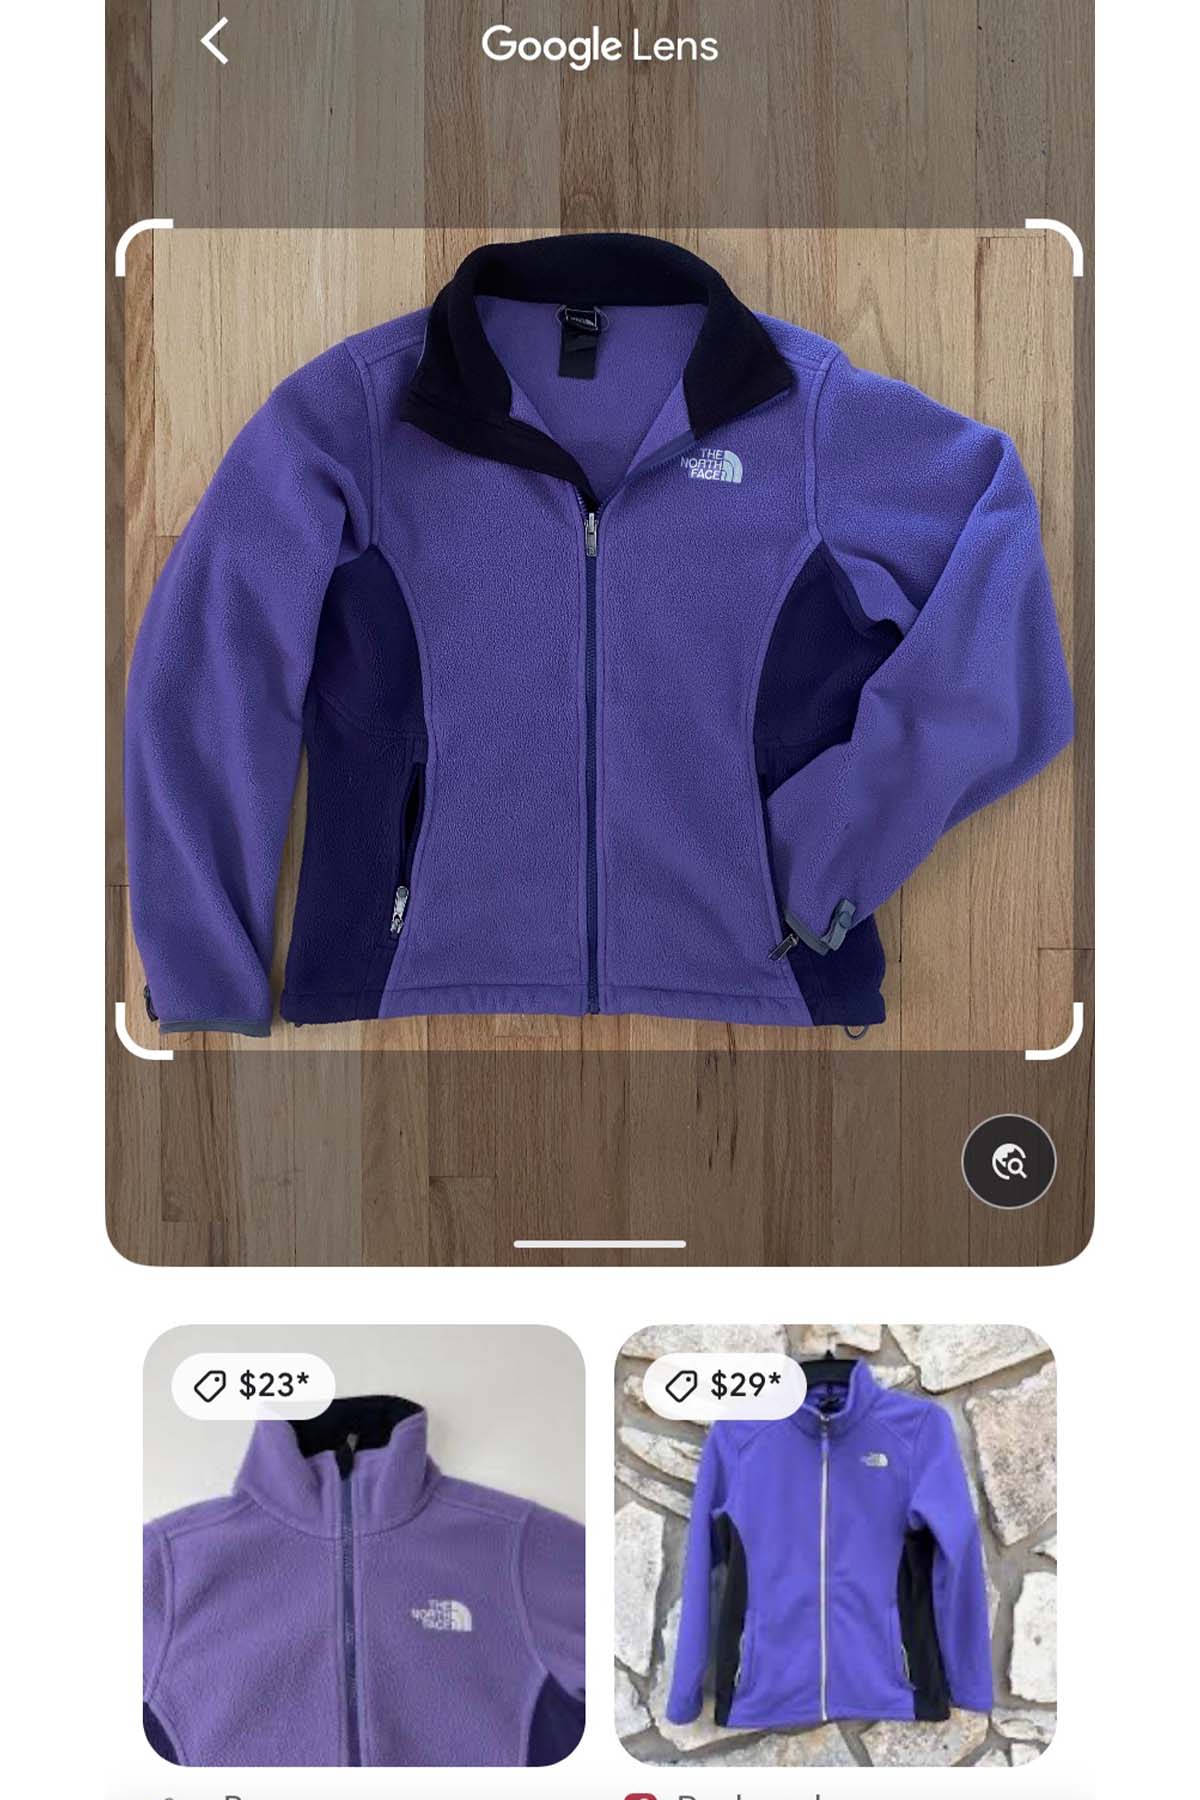 screenshot of google image search results for a purple north face jacket.